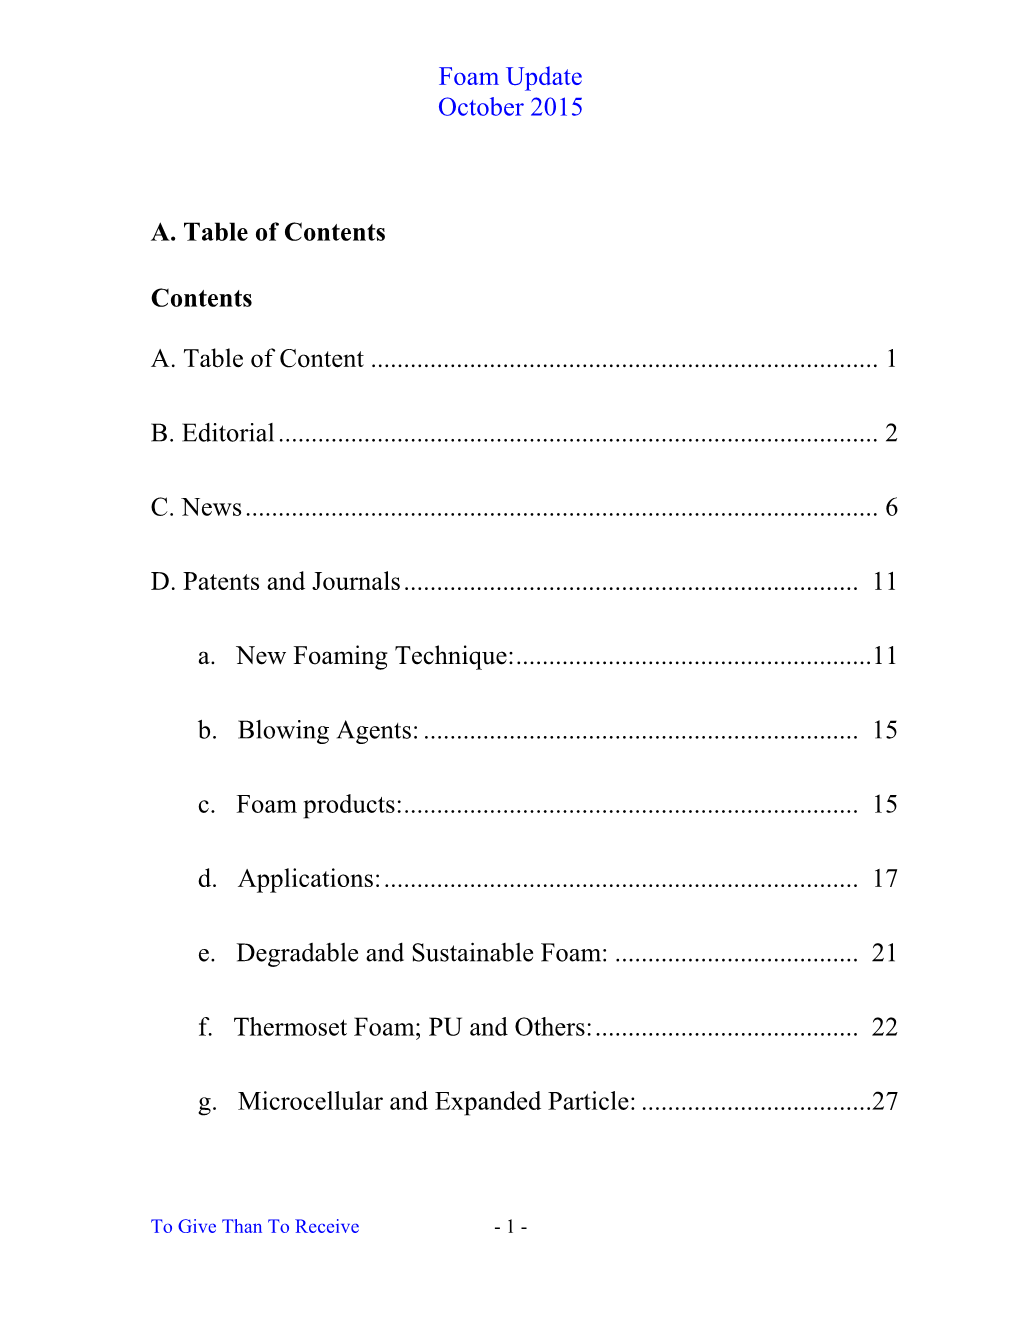 Foam Update October 2015 A. Table of Contents Contents A. Table Of